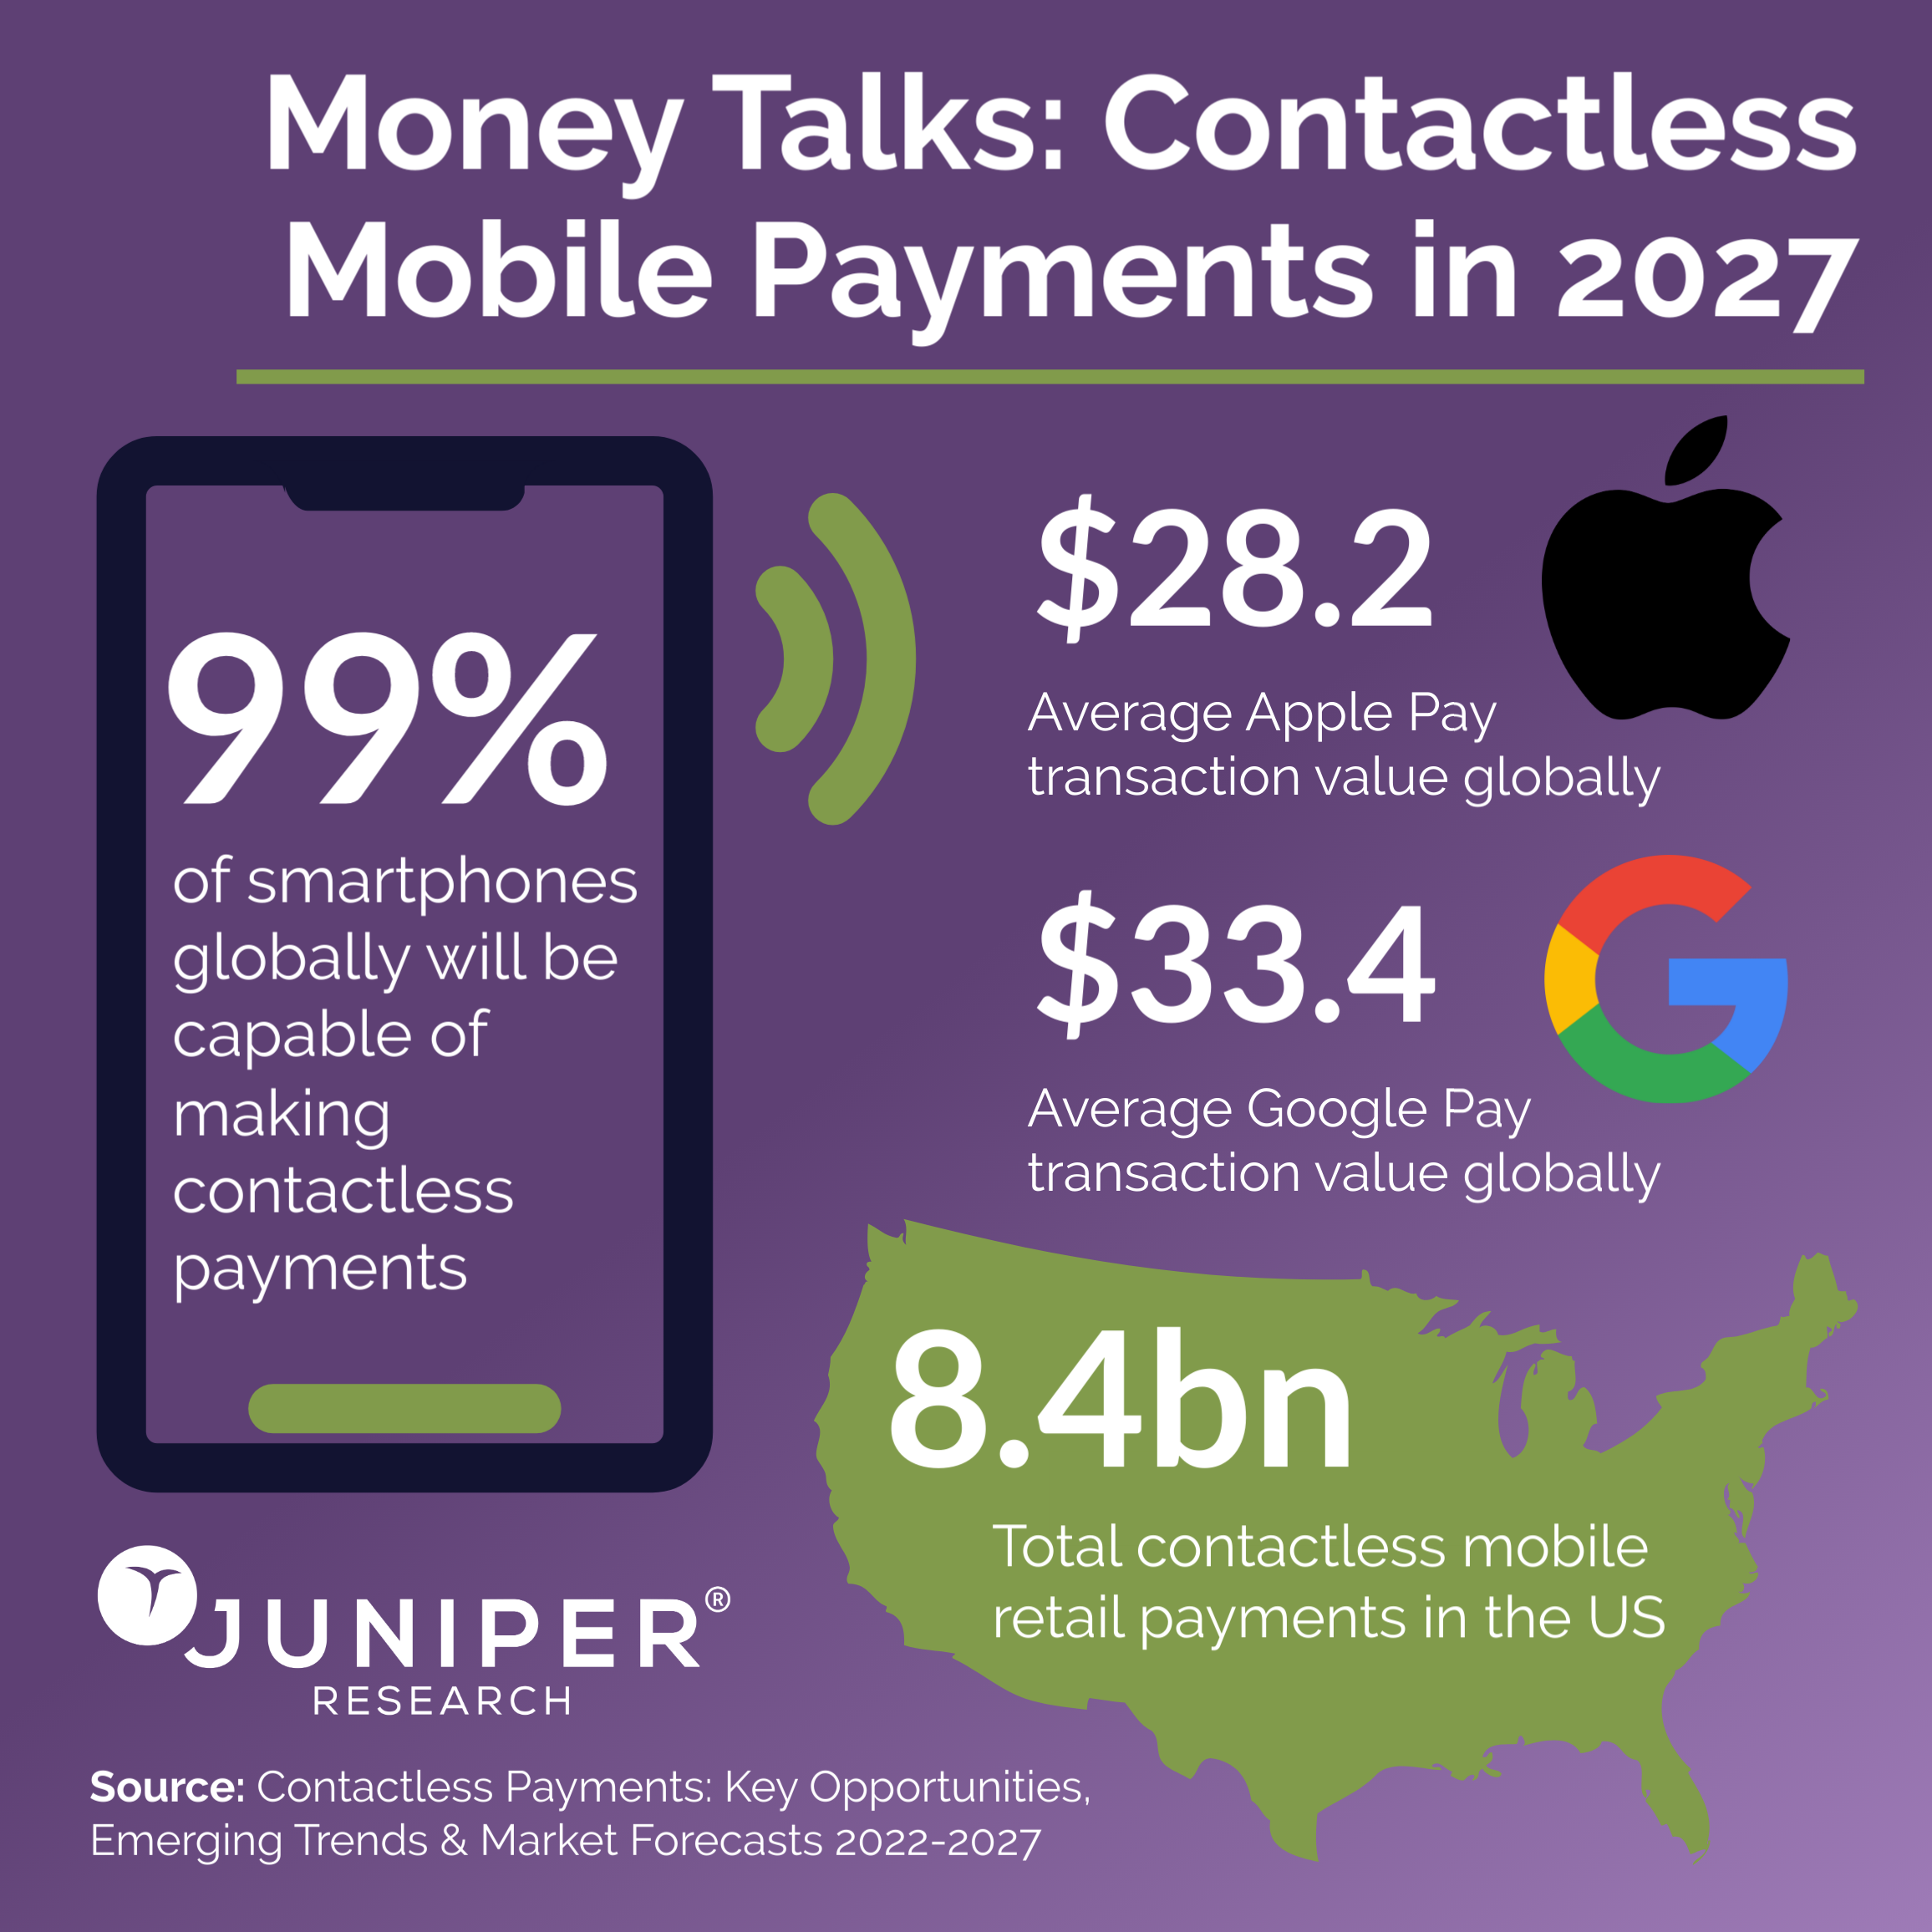 Value of contactless payment transactions to jump